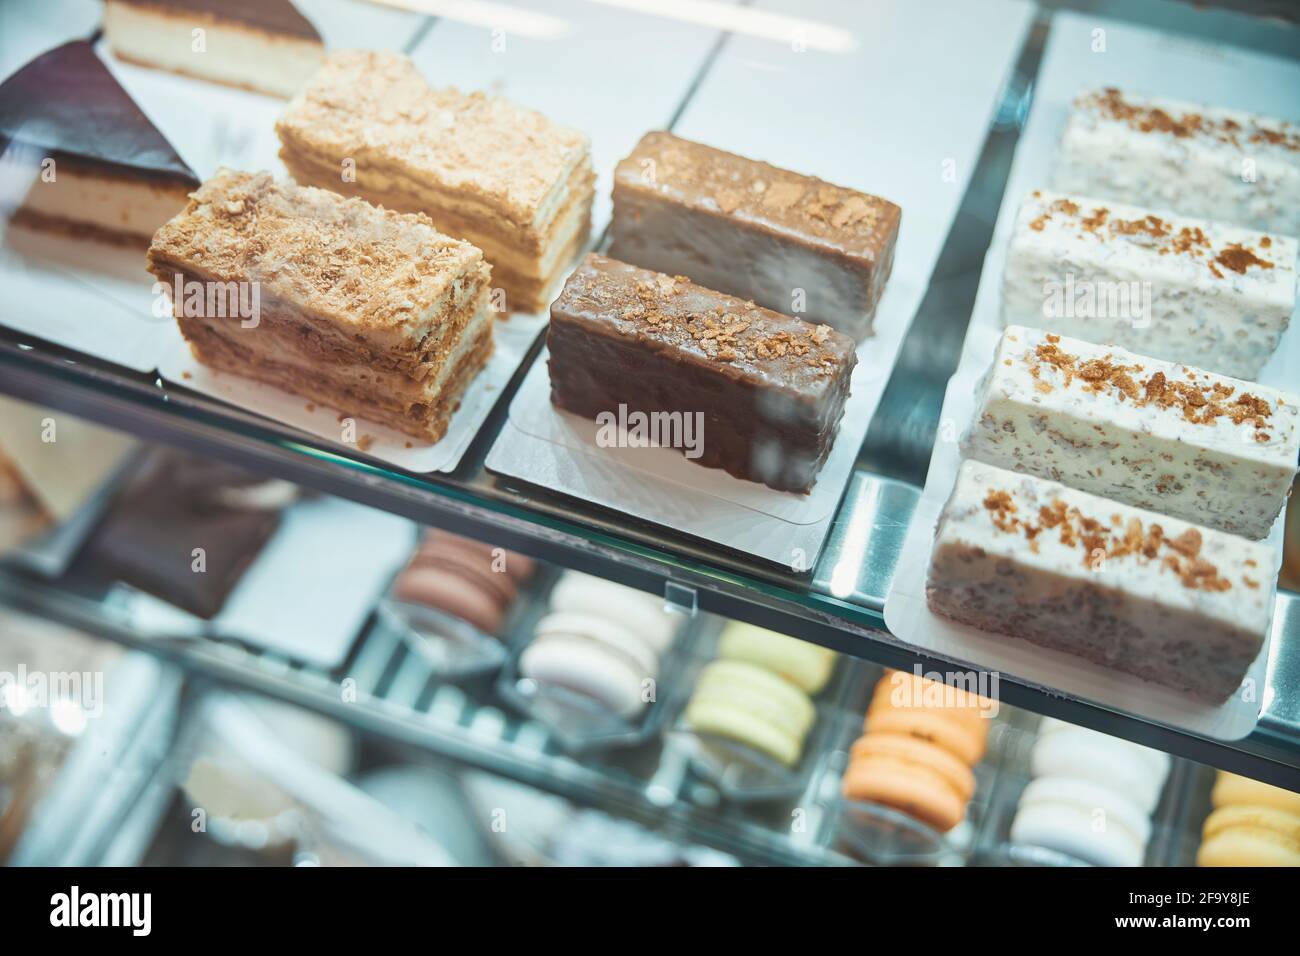 Pieces of various desserts lined up under the glass Stock Photo